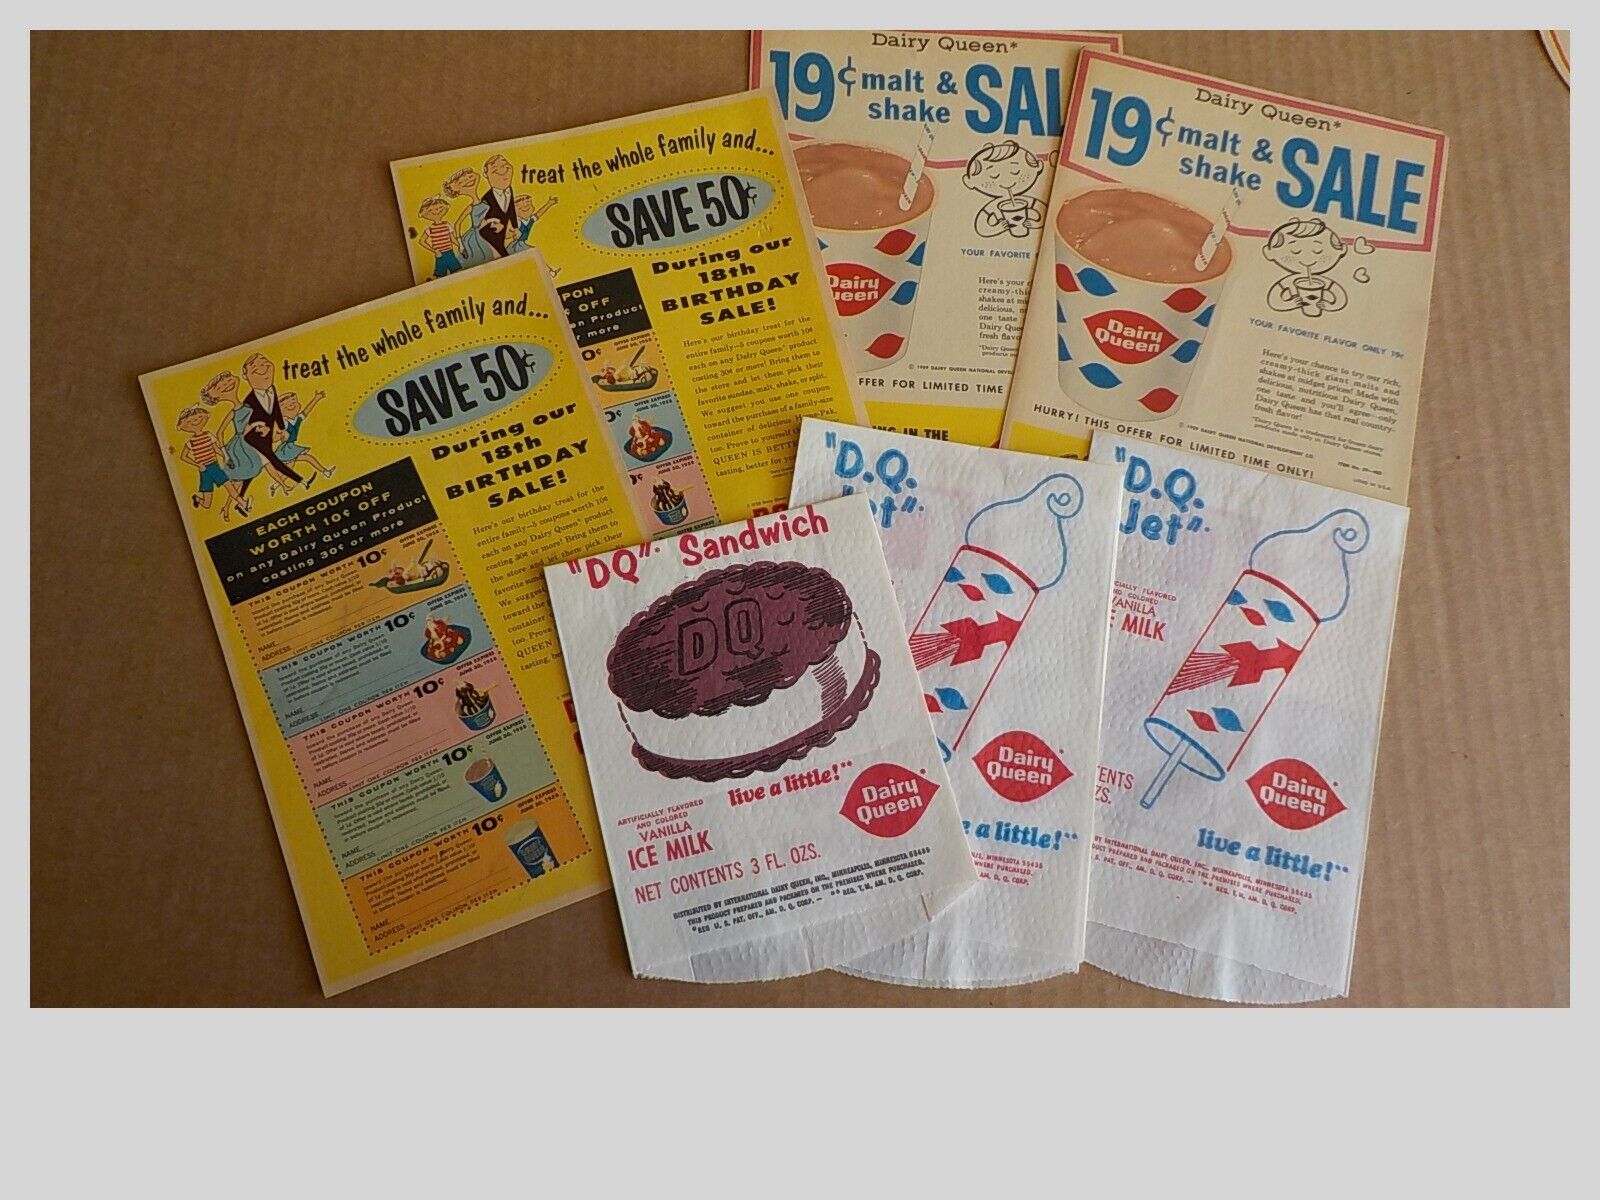 VINTAGE 1958-59 ORIGINAL DAIRY QUEEN PAPER ADS AND WRAPPERS